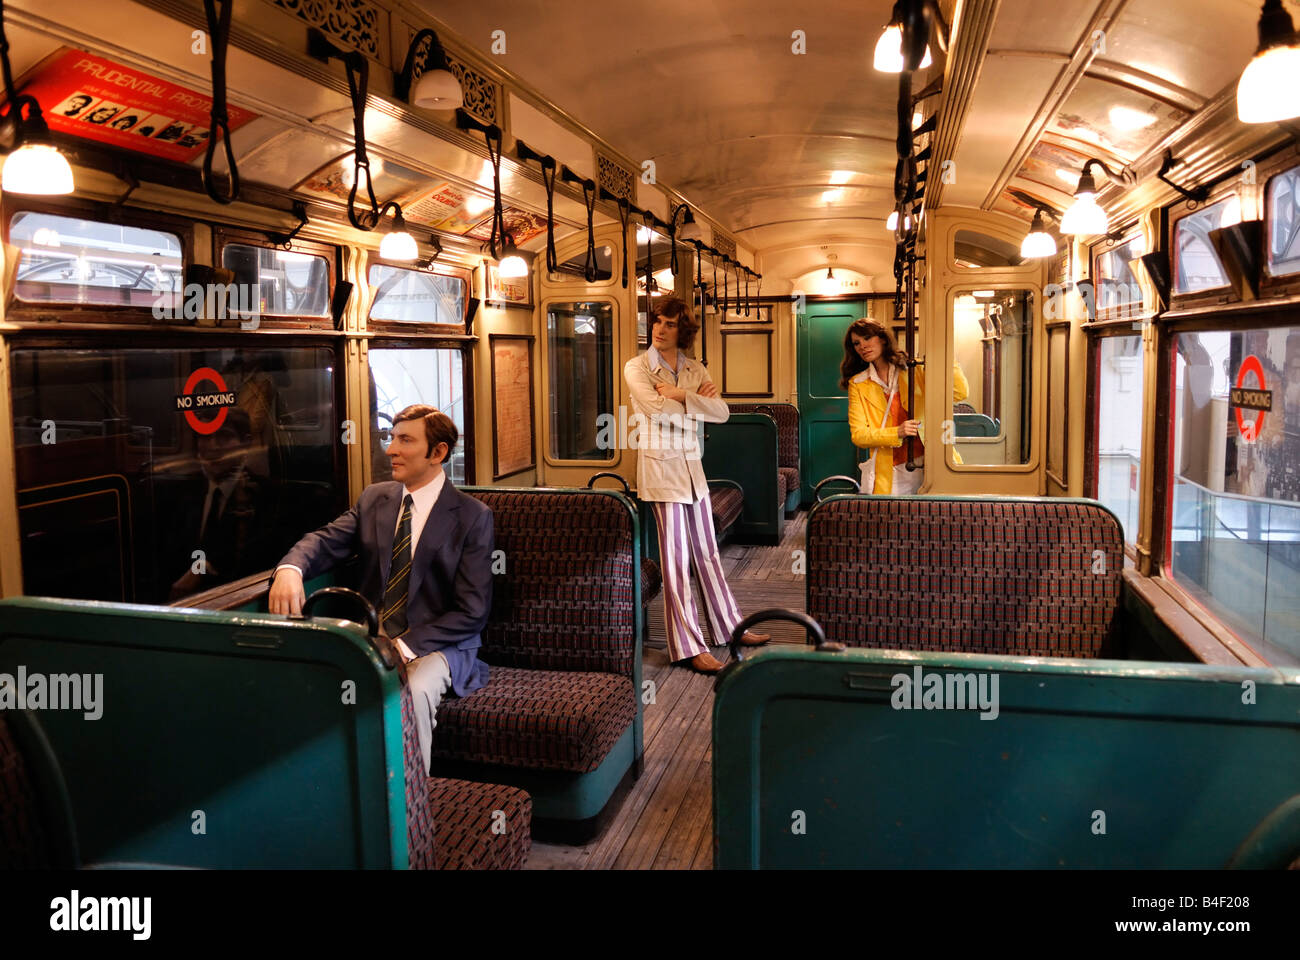 Interior of an Old Underground Train, London Transport Museum Covent Garden Piazza London Britain. Stock Photo